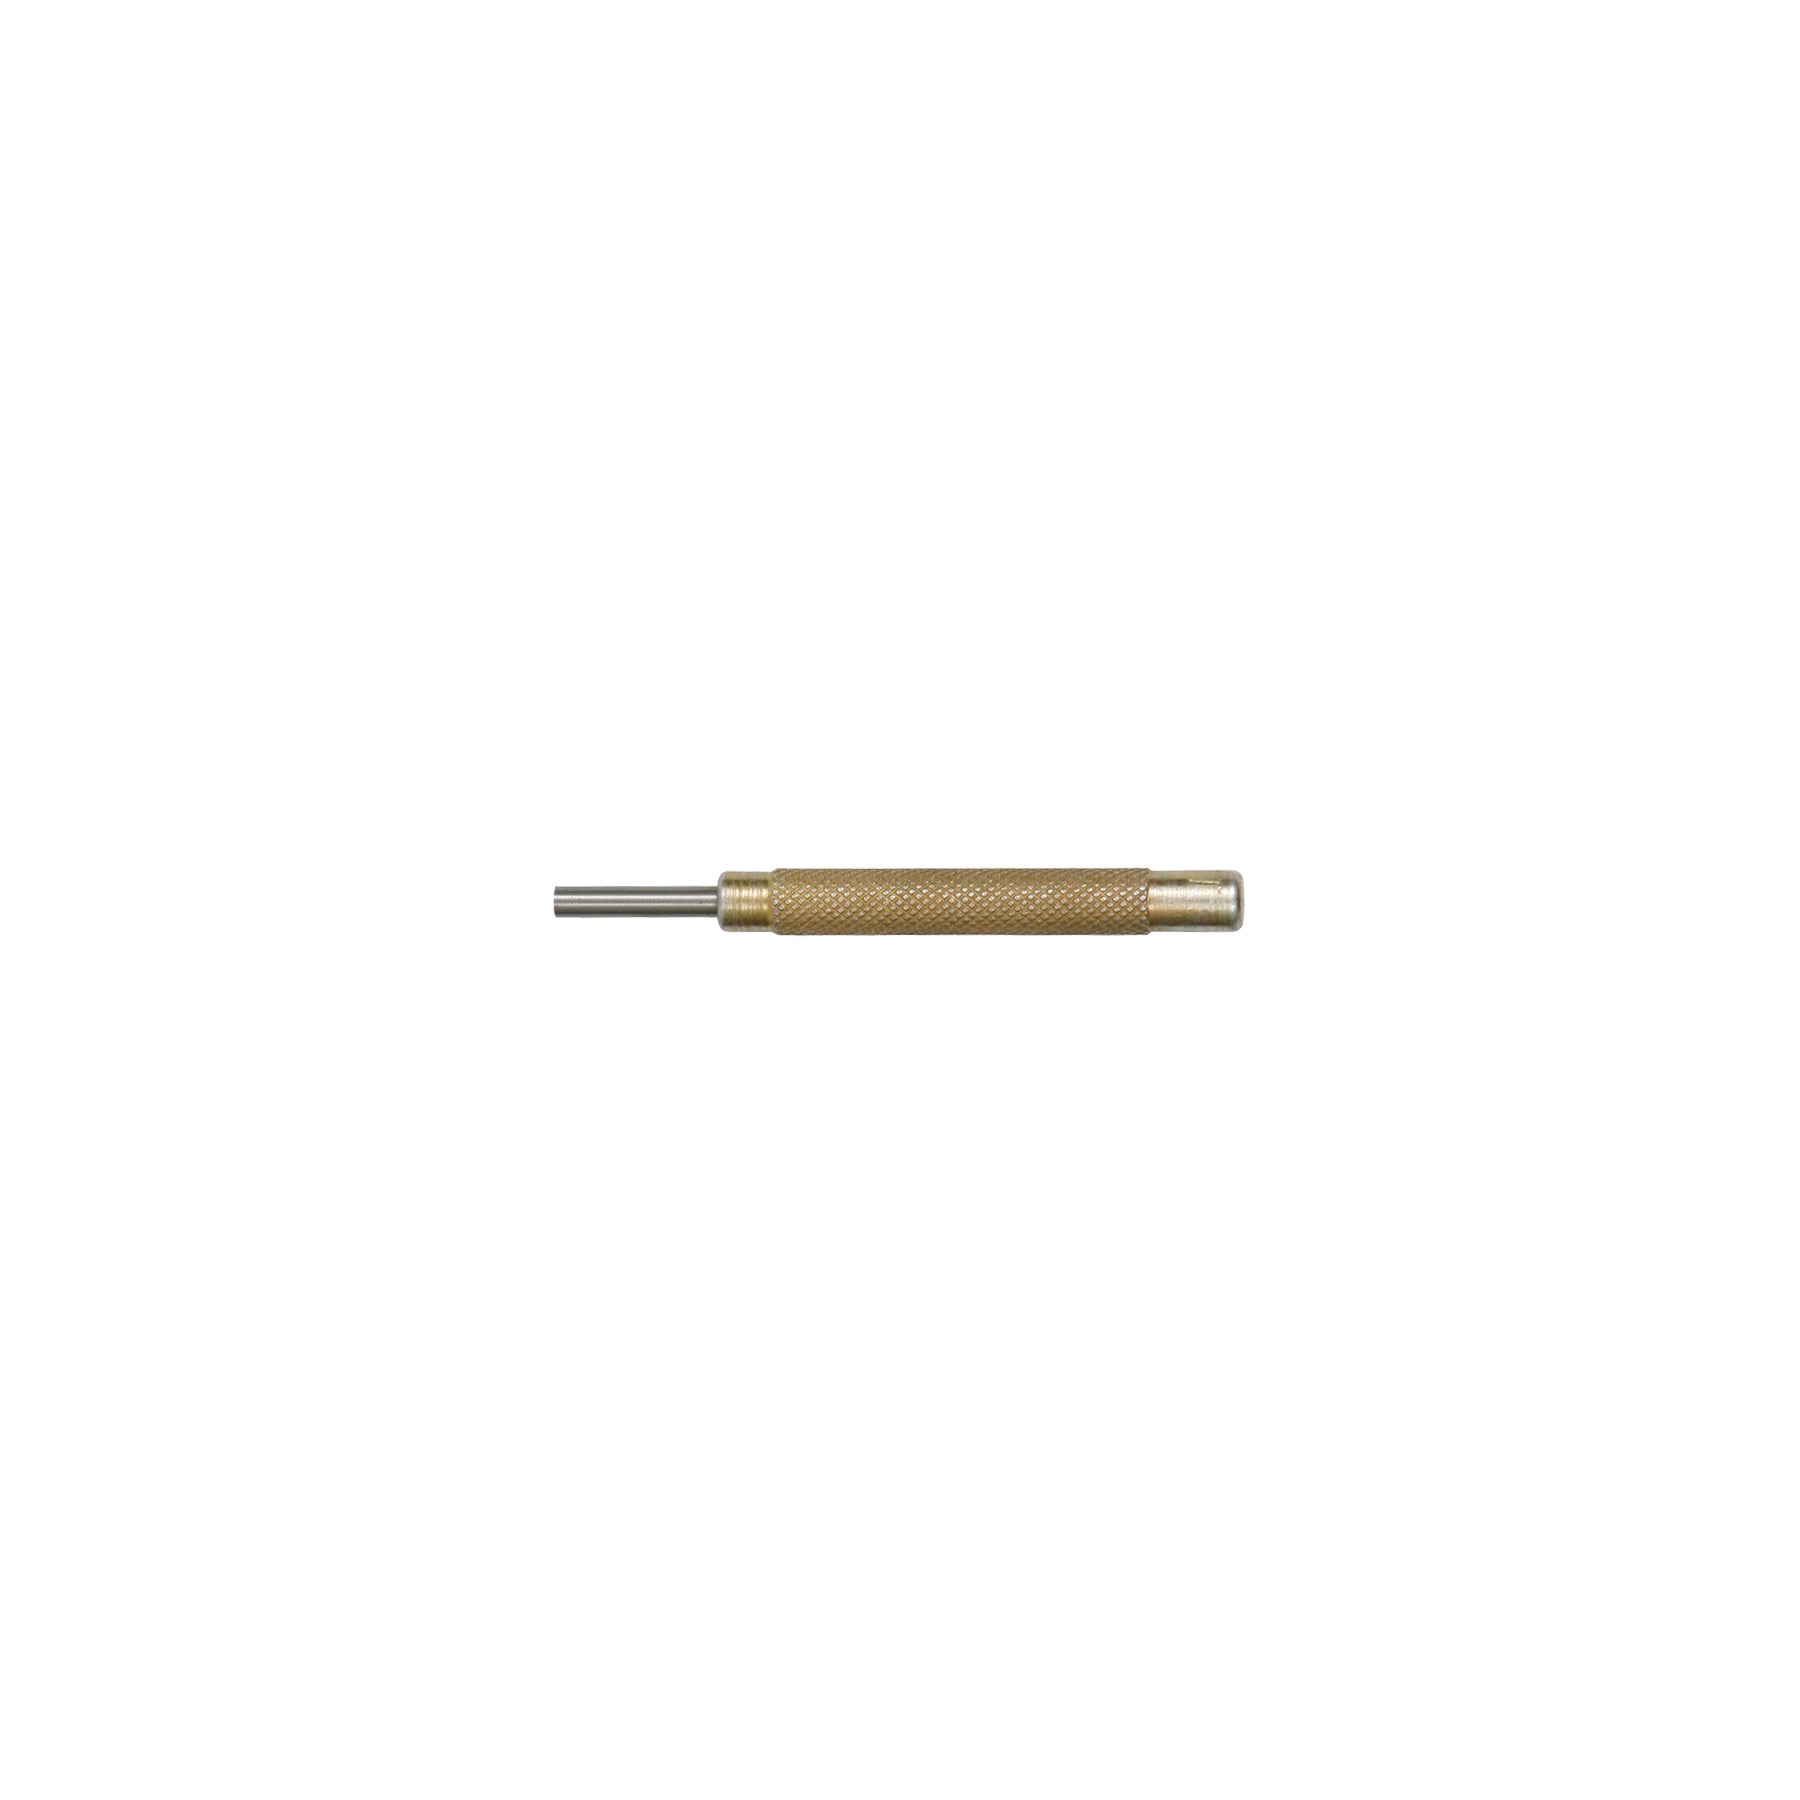 3mm Short Pin Punch 4PPS03 by Mumme